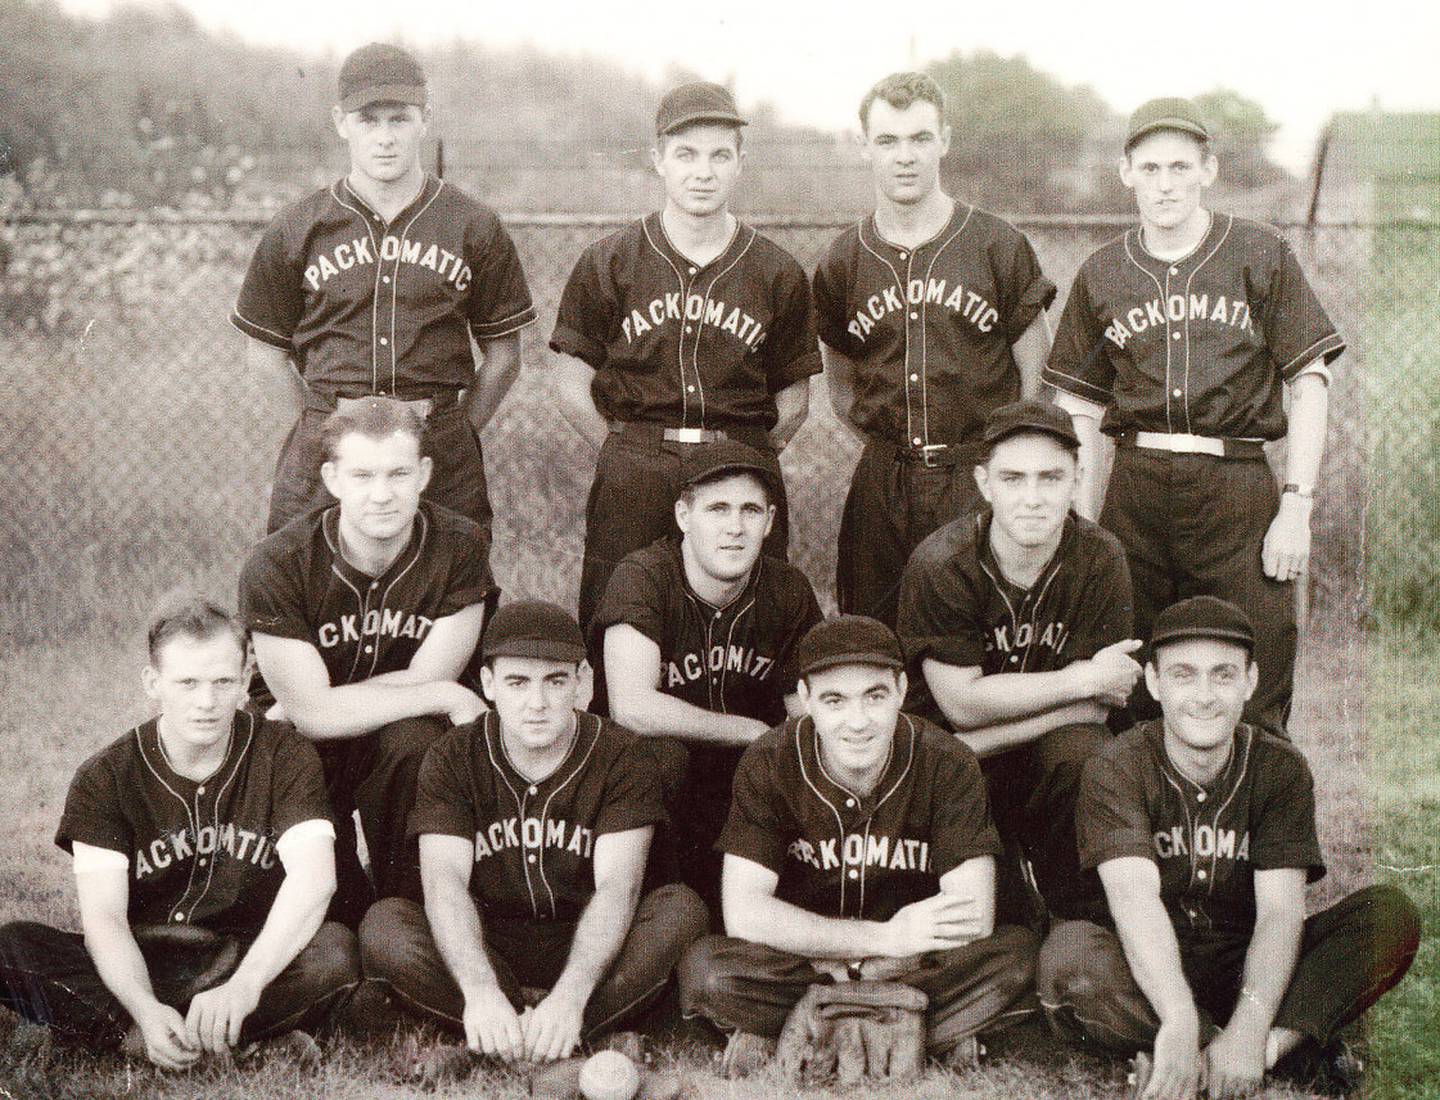 Glenn Masek of Joliet played football at the former Joliet Catholic High School, and was interested in sports for all of his life, as a participant and a fan.  He played softball for the Packomatic team in Joliet.  This photo was taken at Heggie Field in Joliet, on July 16, 1946, after Packomatic defeated Weber Dairy in a 17-12 slugfest.  In the photo are, front row, left to right, Hank Phillips, Art Burns, Bob McGuire and Dick McGuire; middle row, Rich Young, Glenn Masek, Tom Rink; and top row, Fran DePratt, John Daly, Jack Knarr and Ray Phillips.